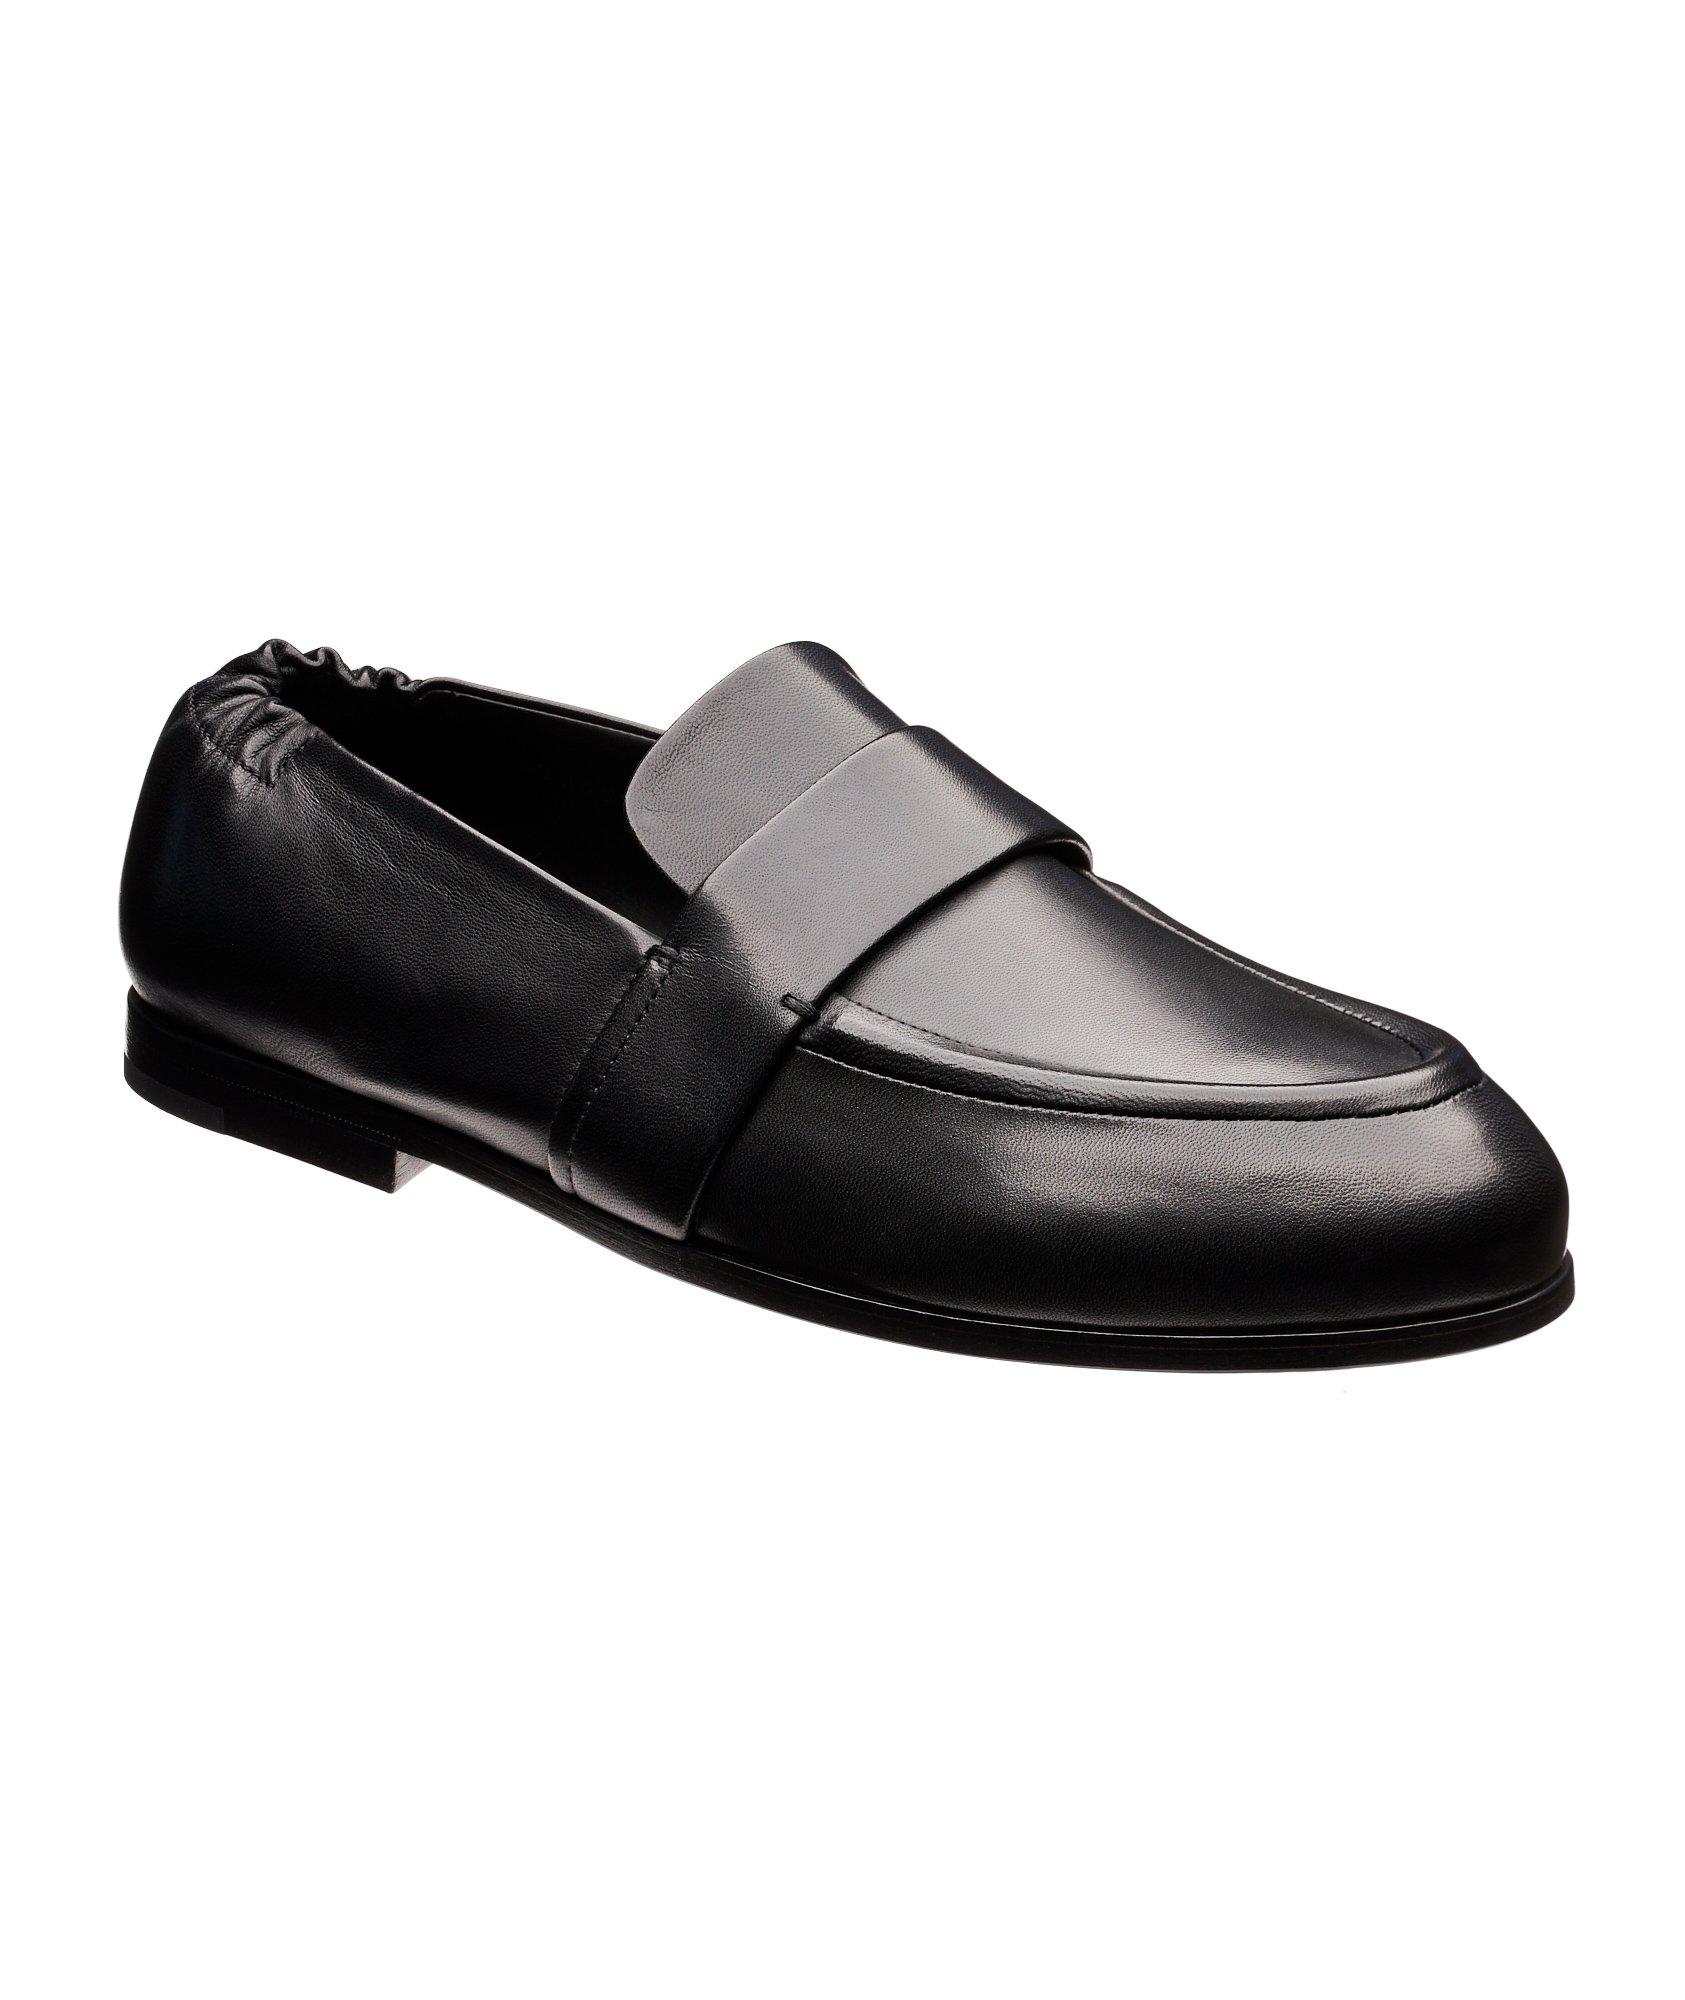 Calfskin Penny Loafers image 0